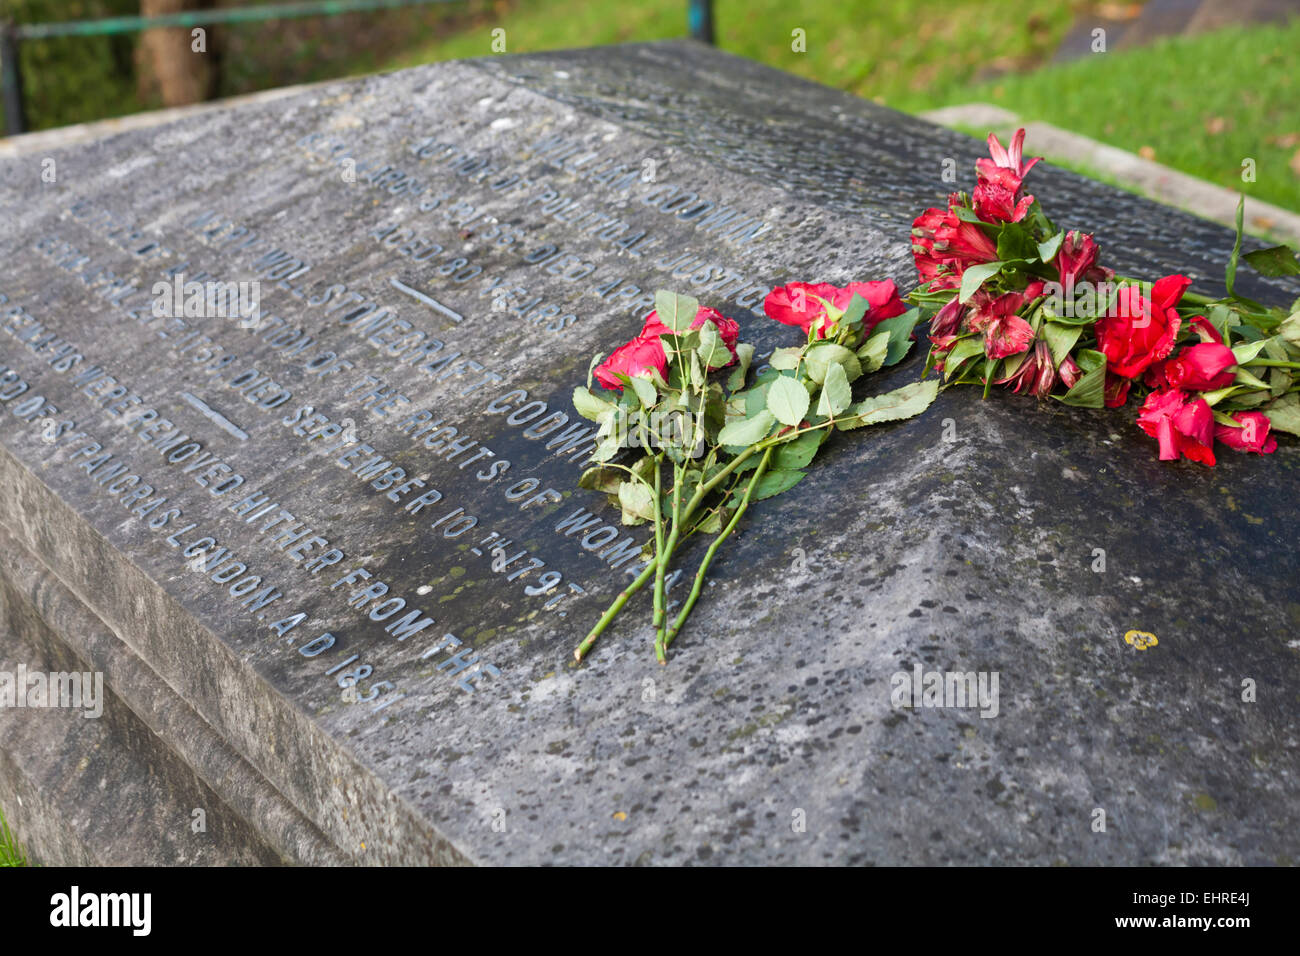 Red Roses on Mary Shelley's grave, Mary Wollstonecraft Shelley author of Frankenstein, at St Peters Church, Bournemouth, Dorset, UK Stock Photo